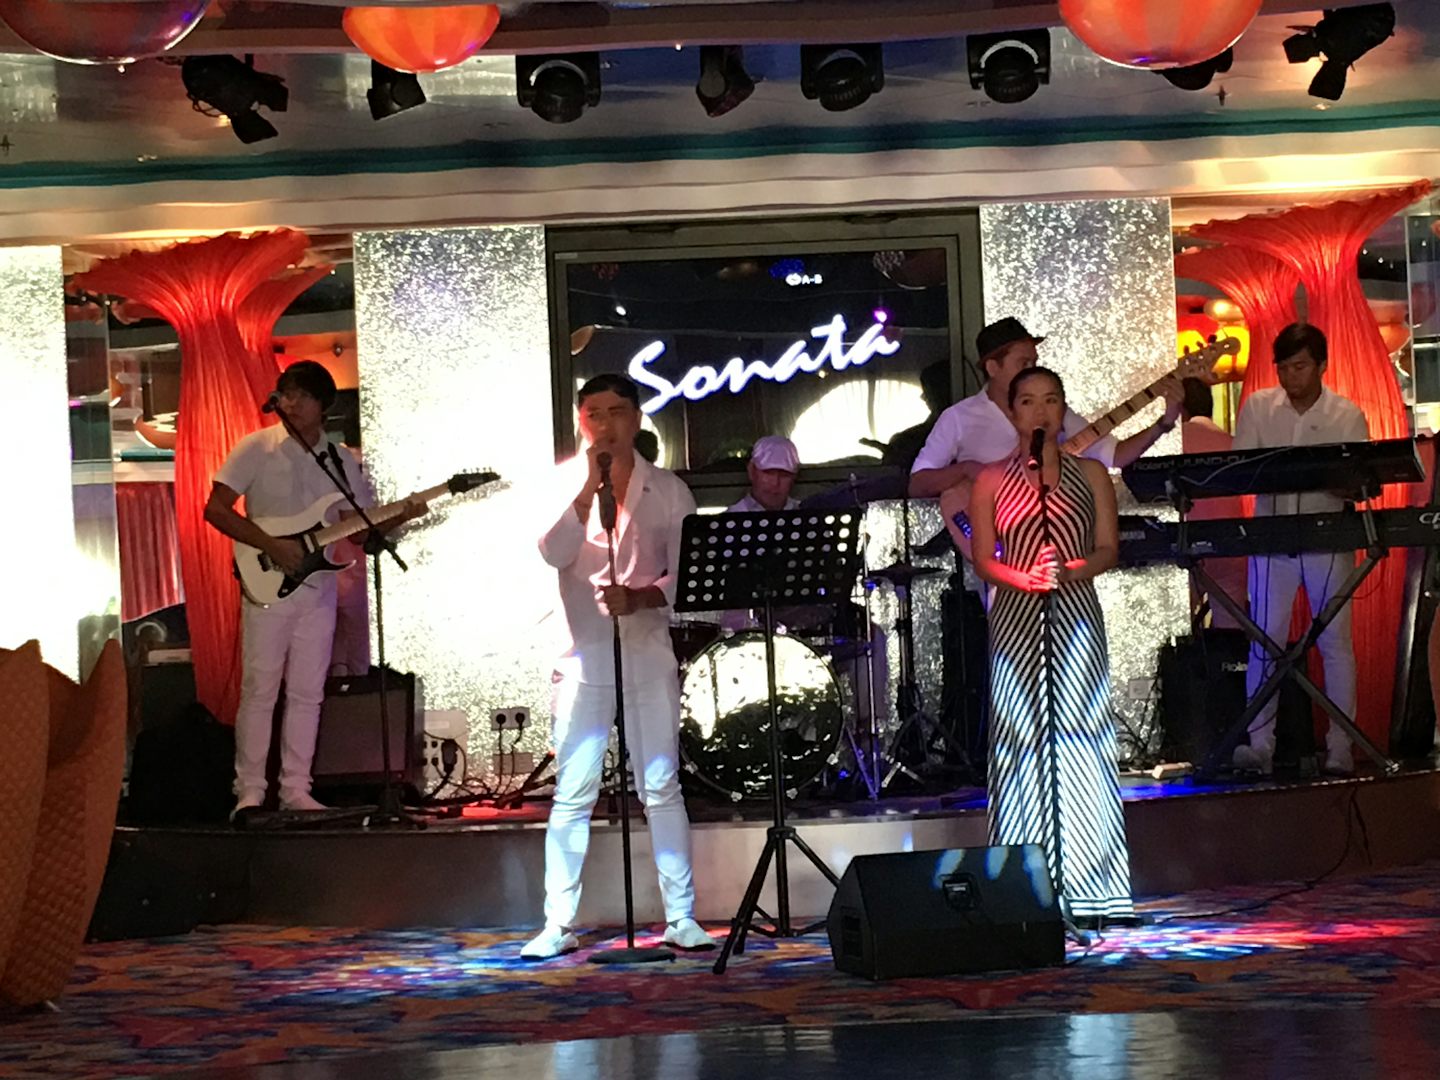 This is sonata they are a group on Norwegian jade Mary was one of the singers they made a big part of our holiday xx